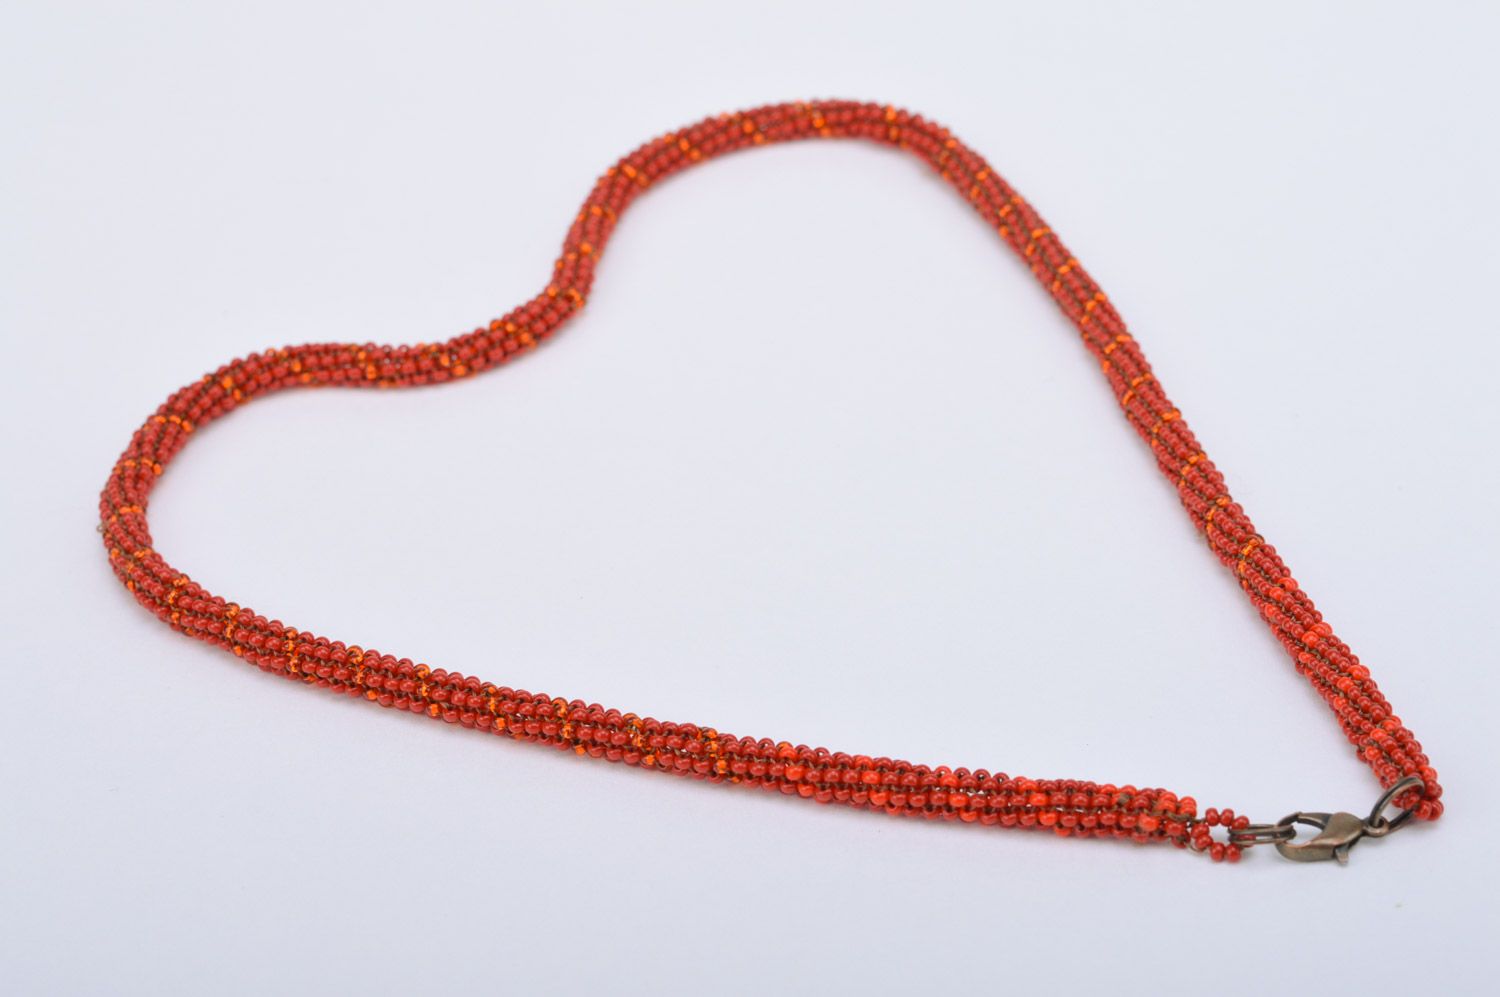 Handmade beaded red cord necklace for women author's work adornment photo 5